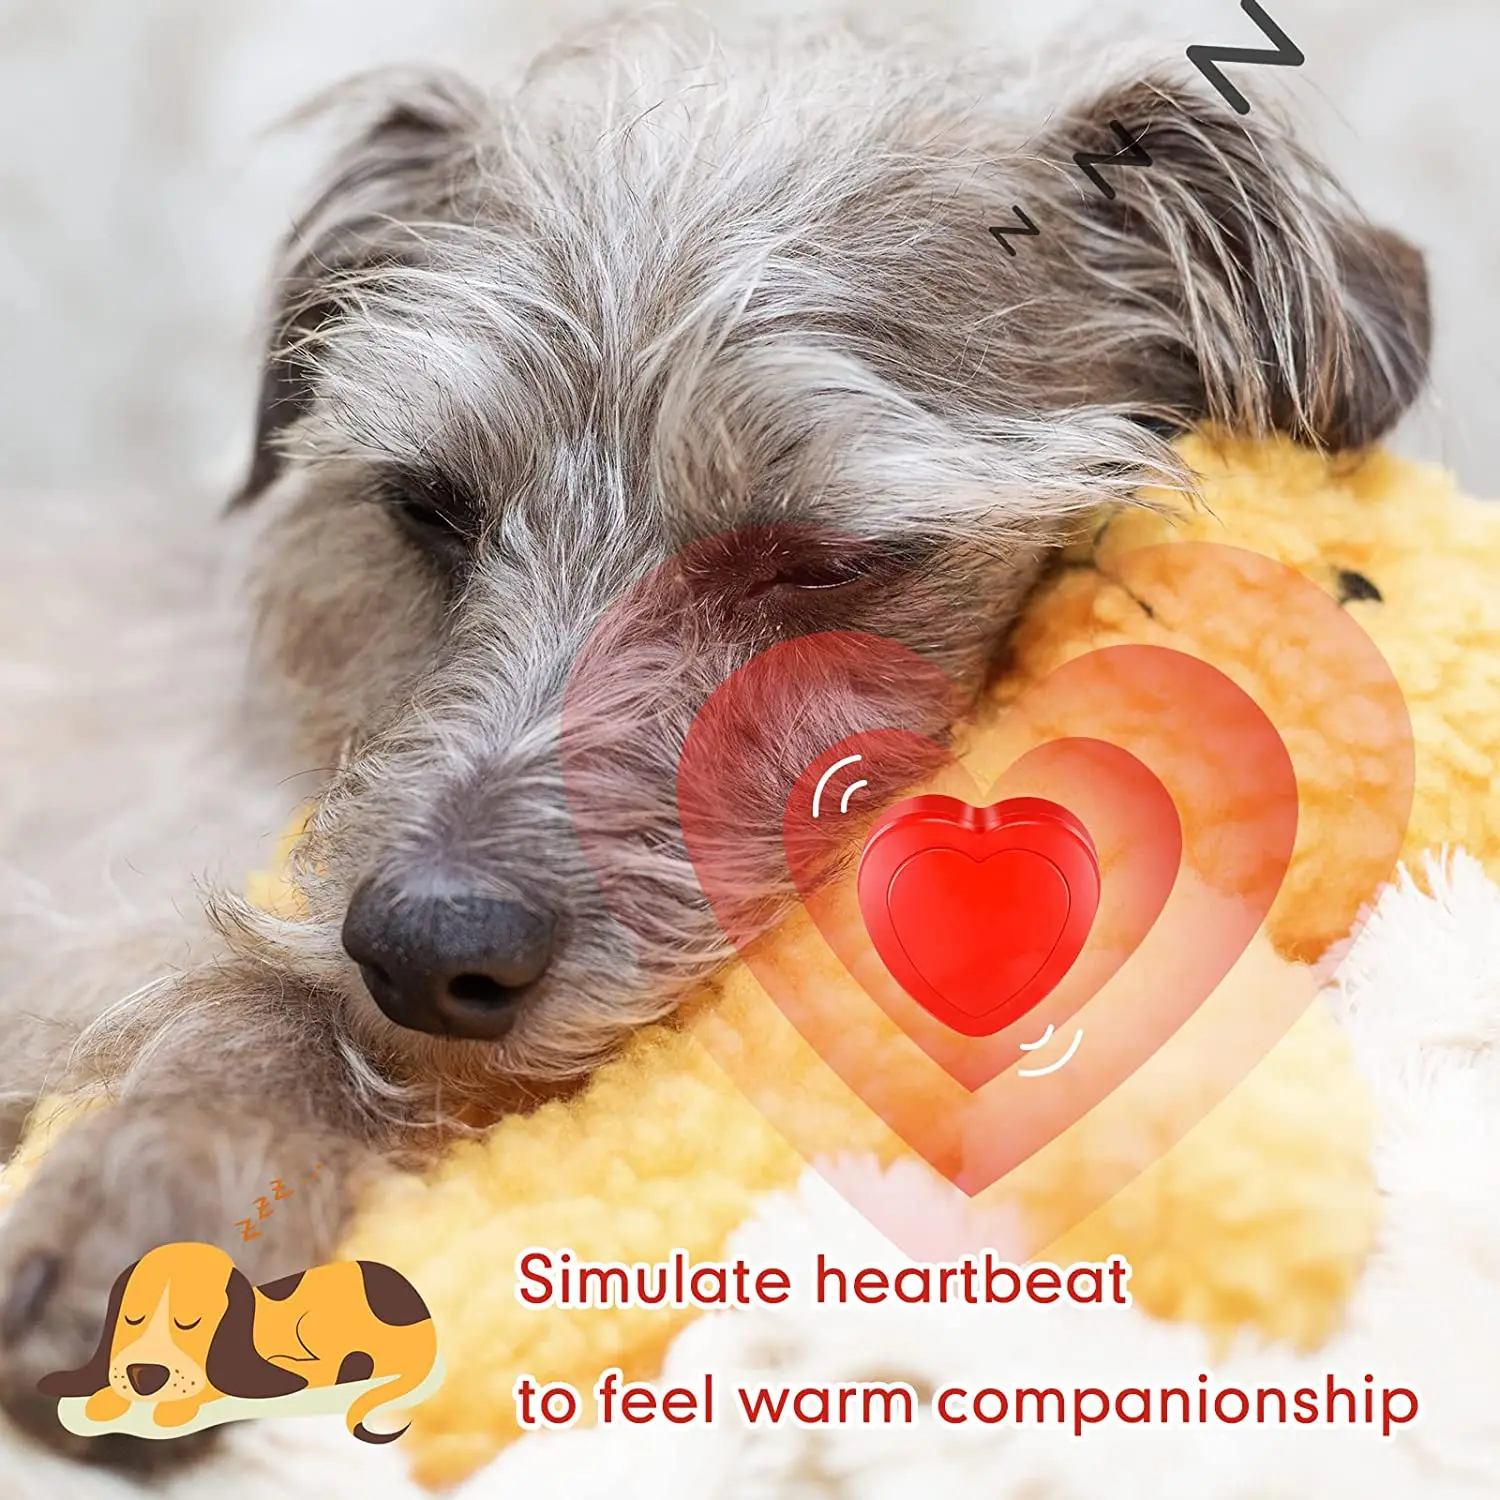 https://ae01.alicdn.com/kf/Sa6312adcd18d4ac8b18d8ee6e35955e0O/Heartbeat-Toy-for-Puppy-Realistic-Heartbeat-Calm-Your-Pet-Relieve-Anxiety-Stuffed-Toy-Comfortable-Behavioral-Training.jpg